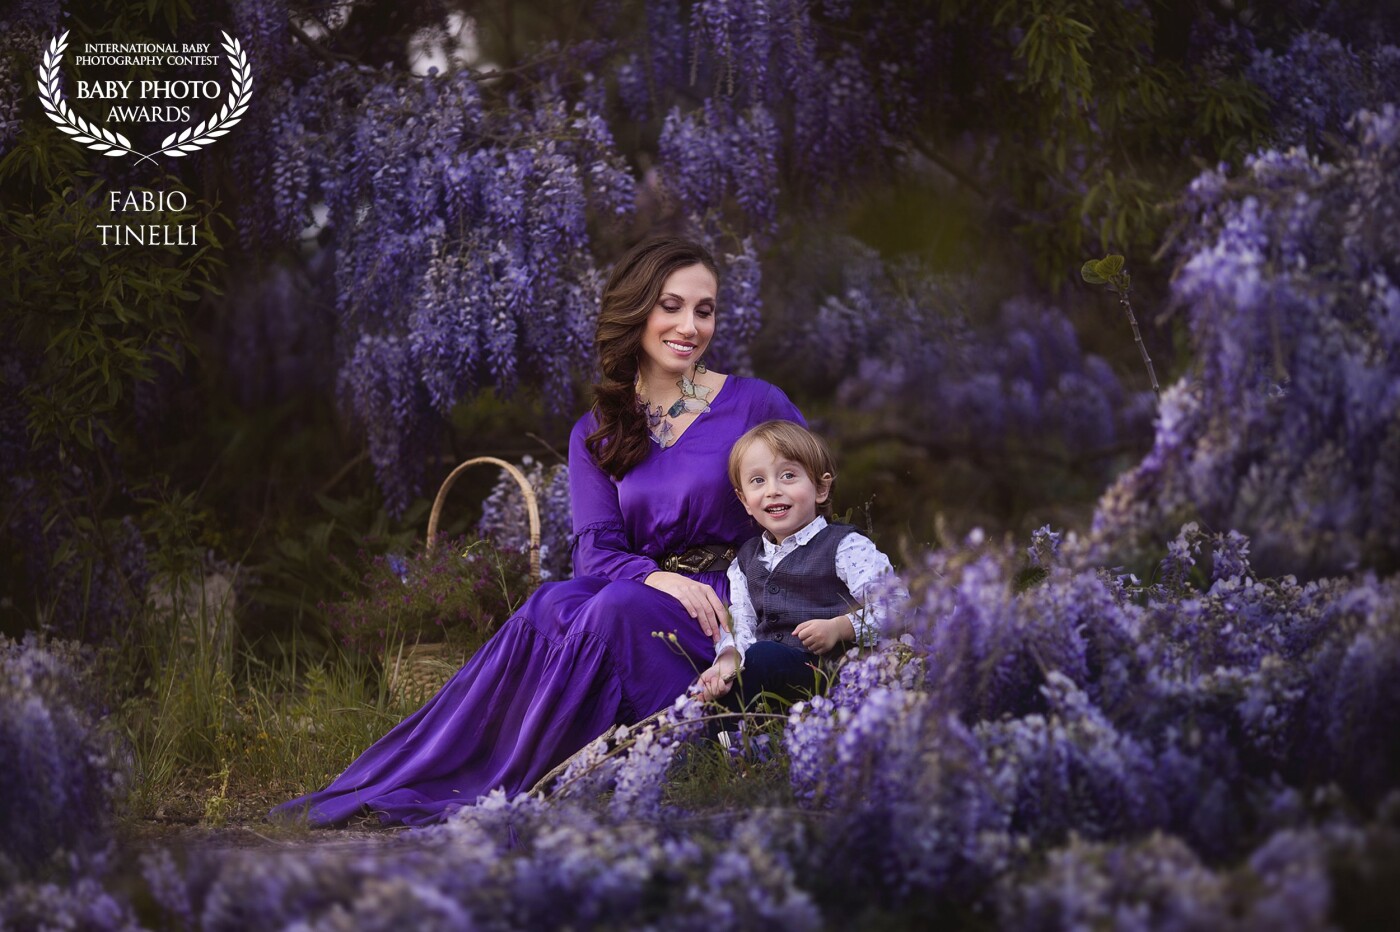 Spring is an explosion of colors and flowers. One of the first flowers of spring is wisteria, a woman's first true love is her son.